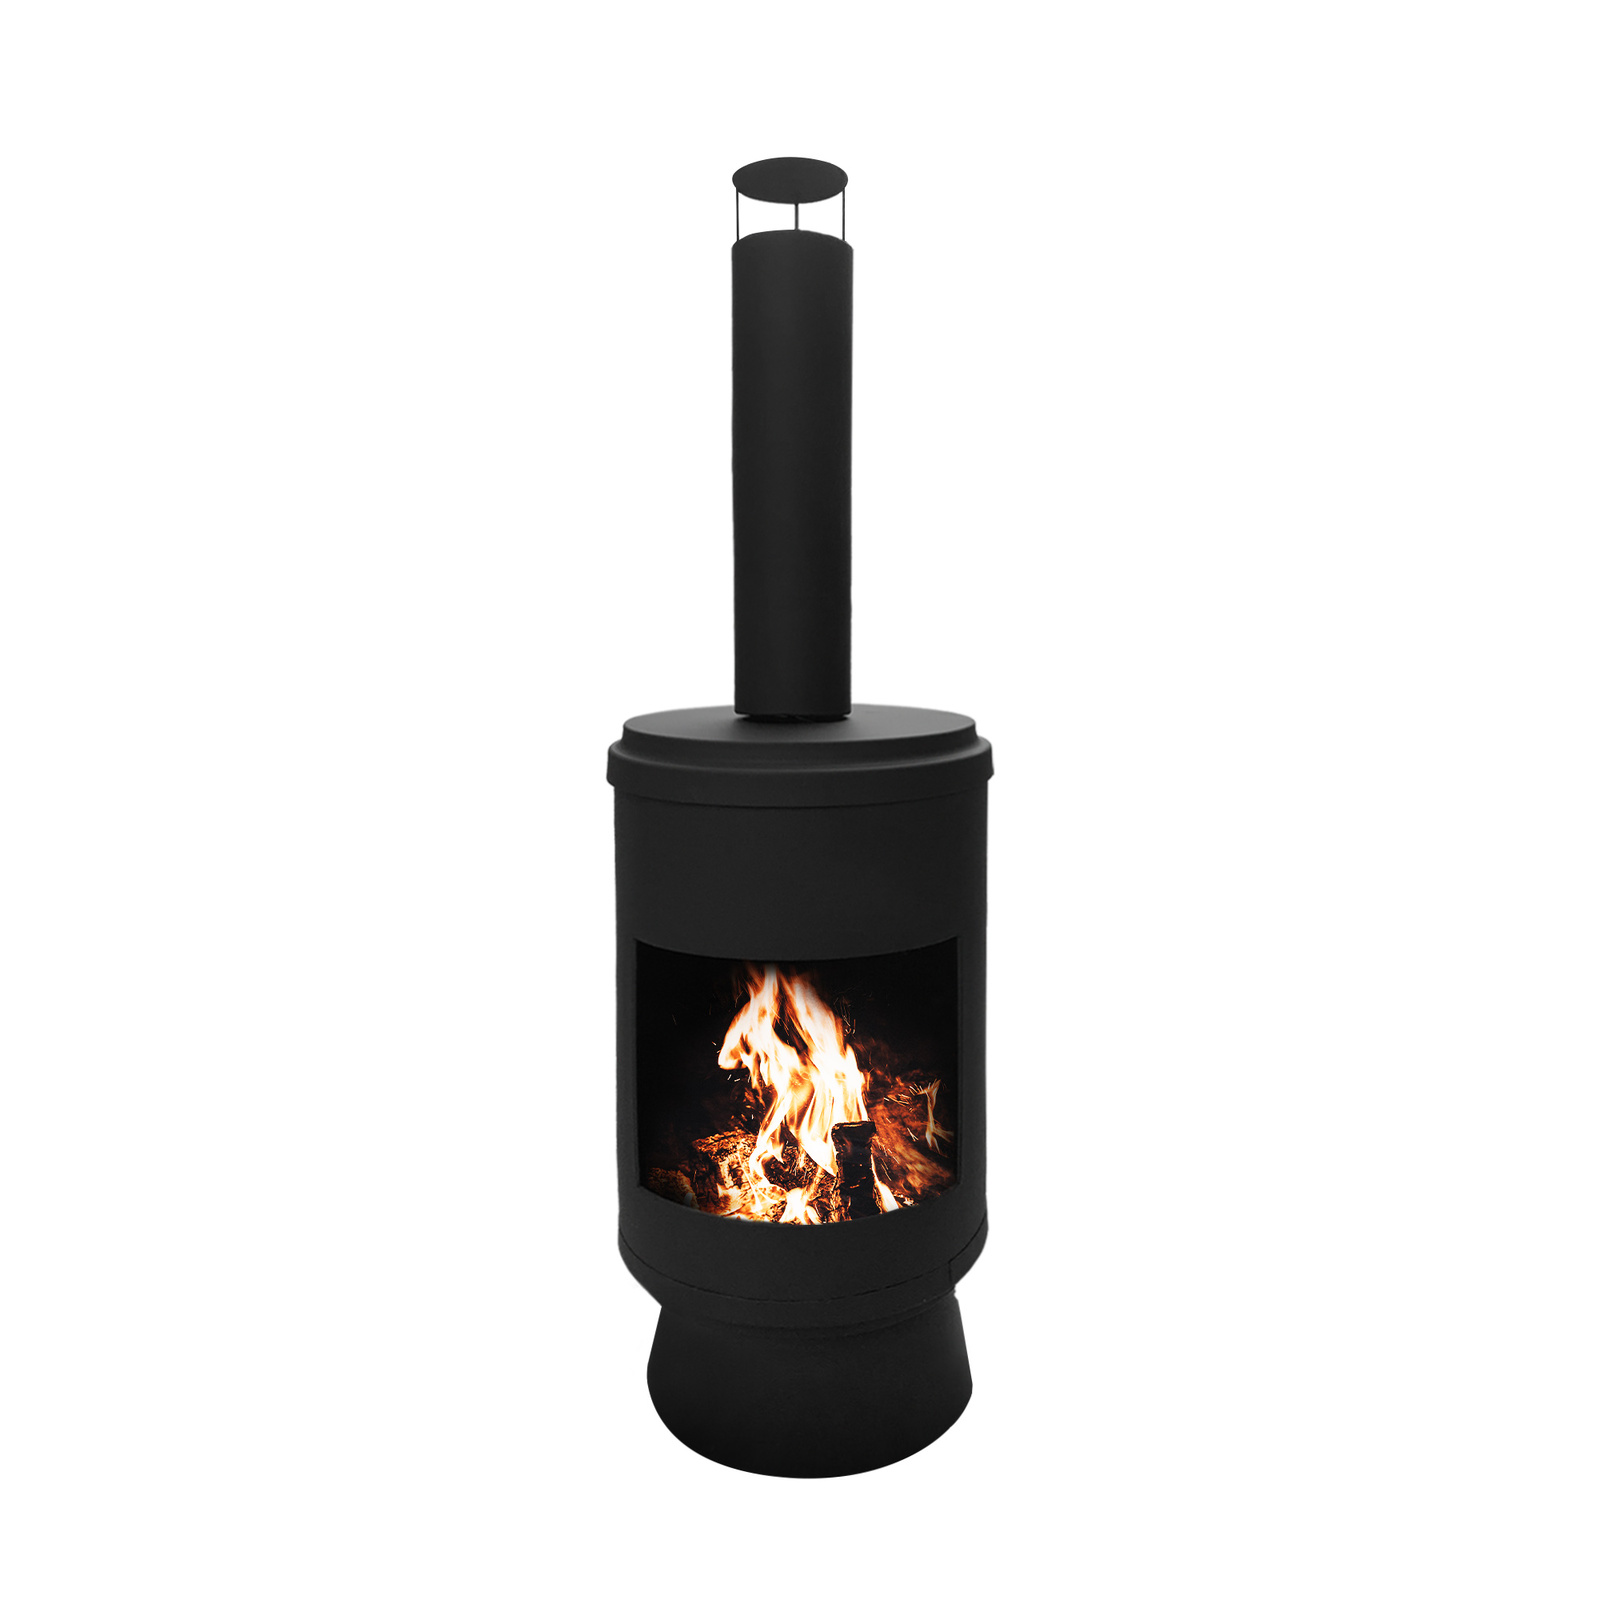 Fire Pit Chimney Fireplace Portable Outdoor Camping and Patio Heater 105cm 